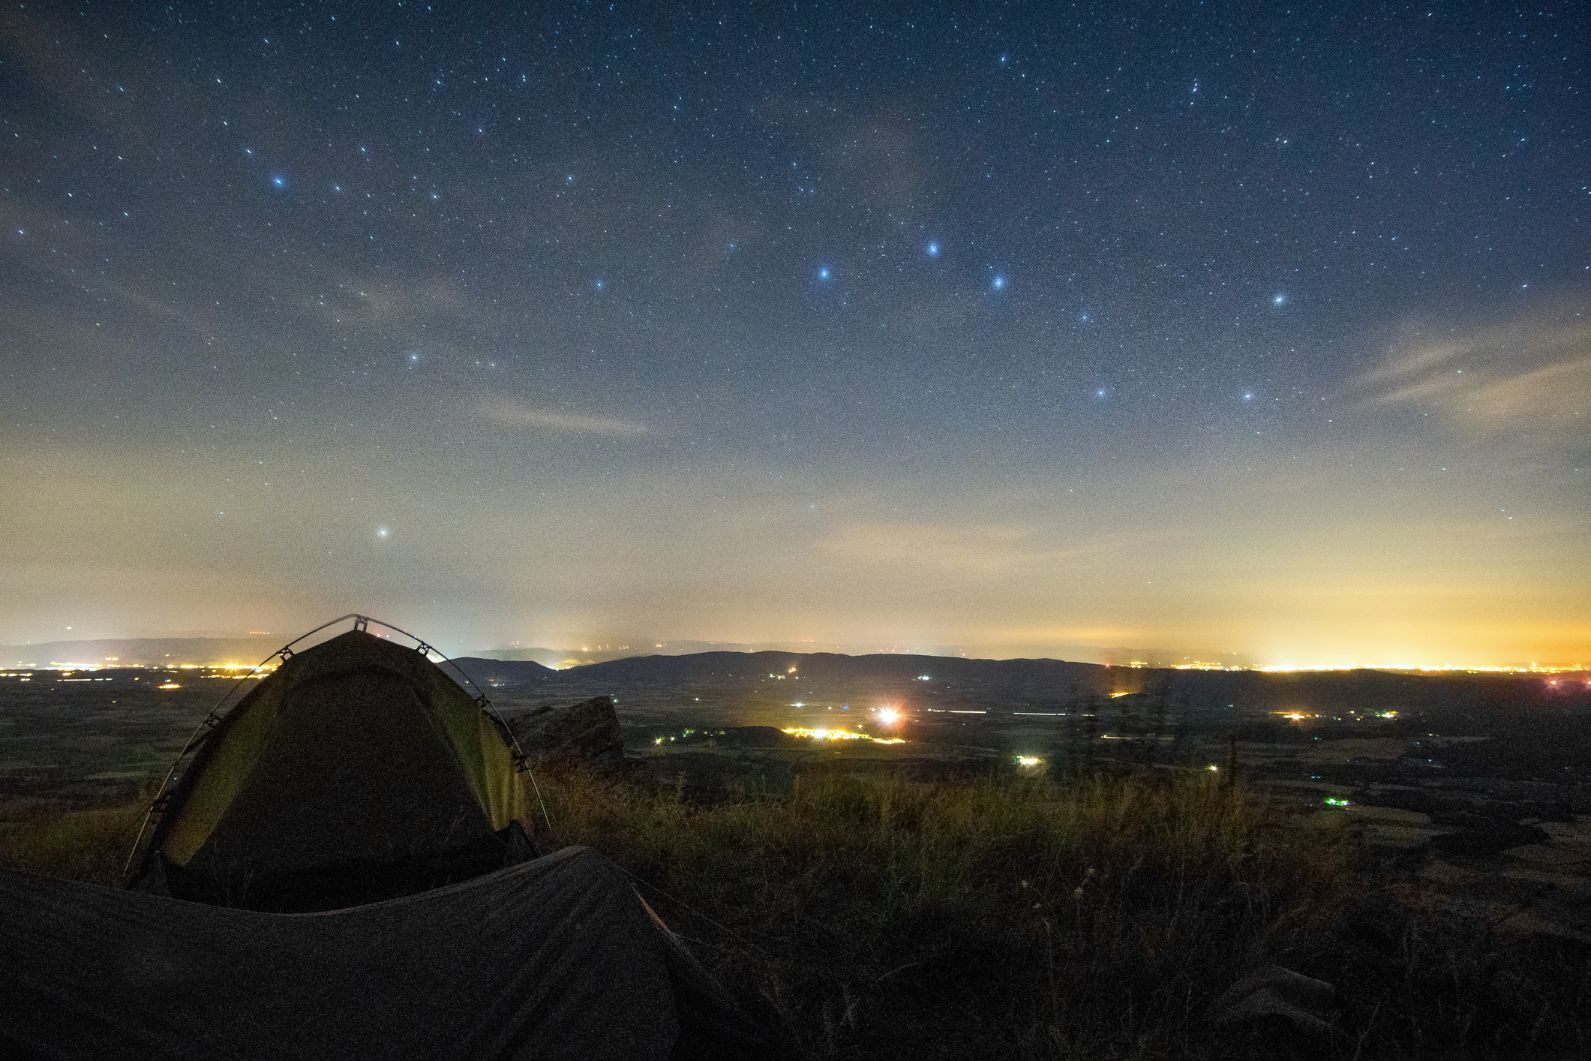 A solitary tent at night - the big dipper constellation is clearly visible in the sky above.